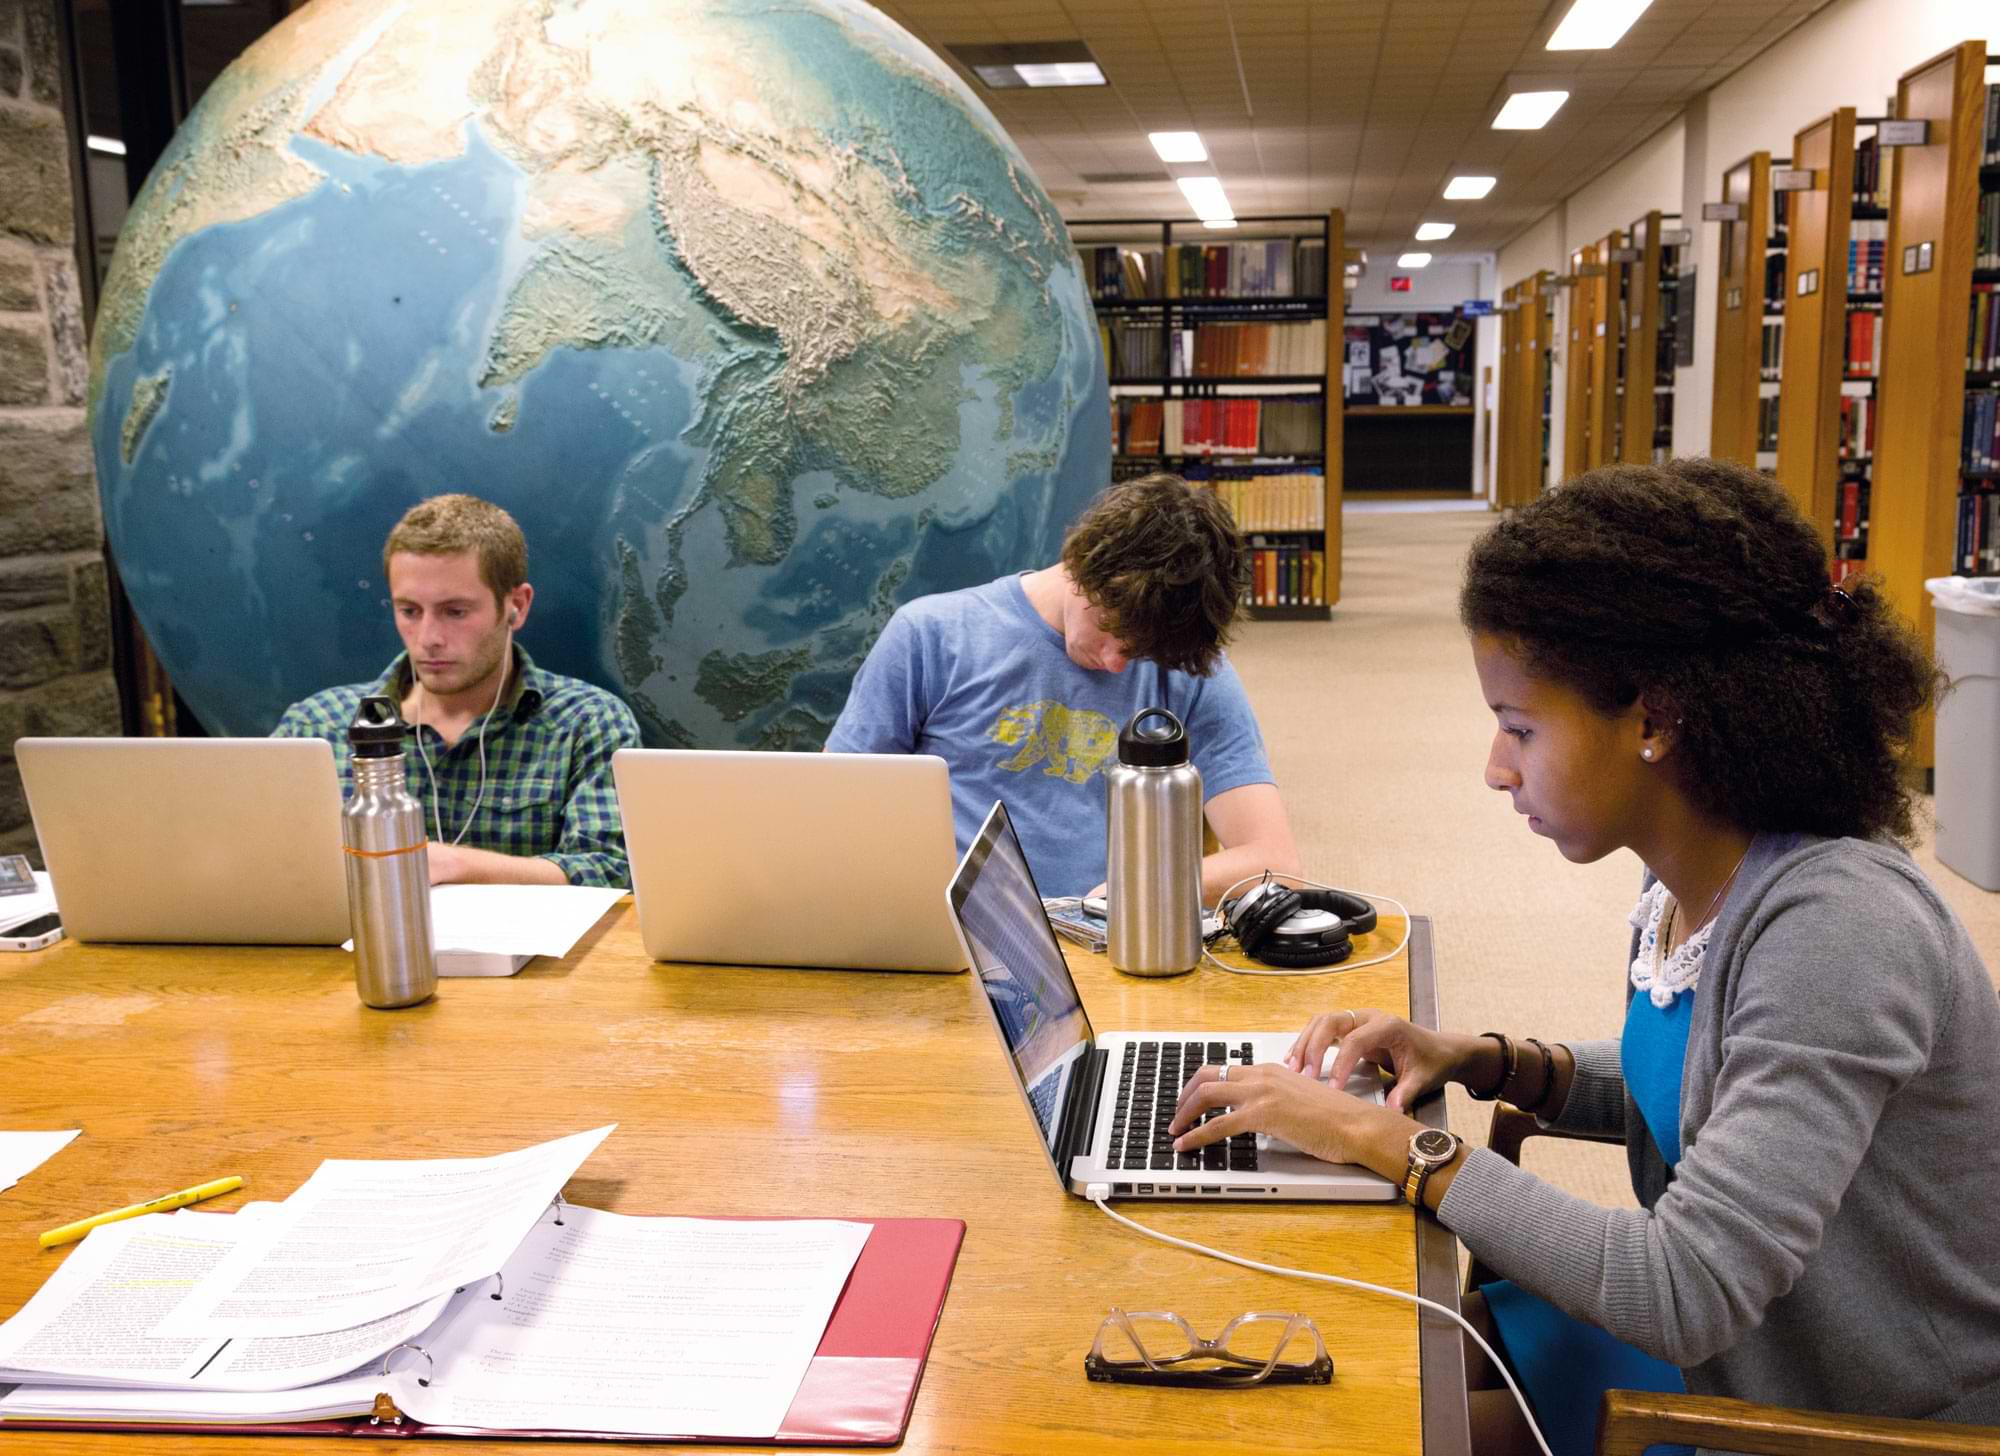 Students studying in the school library